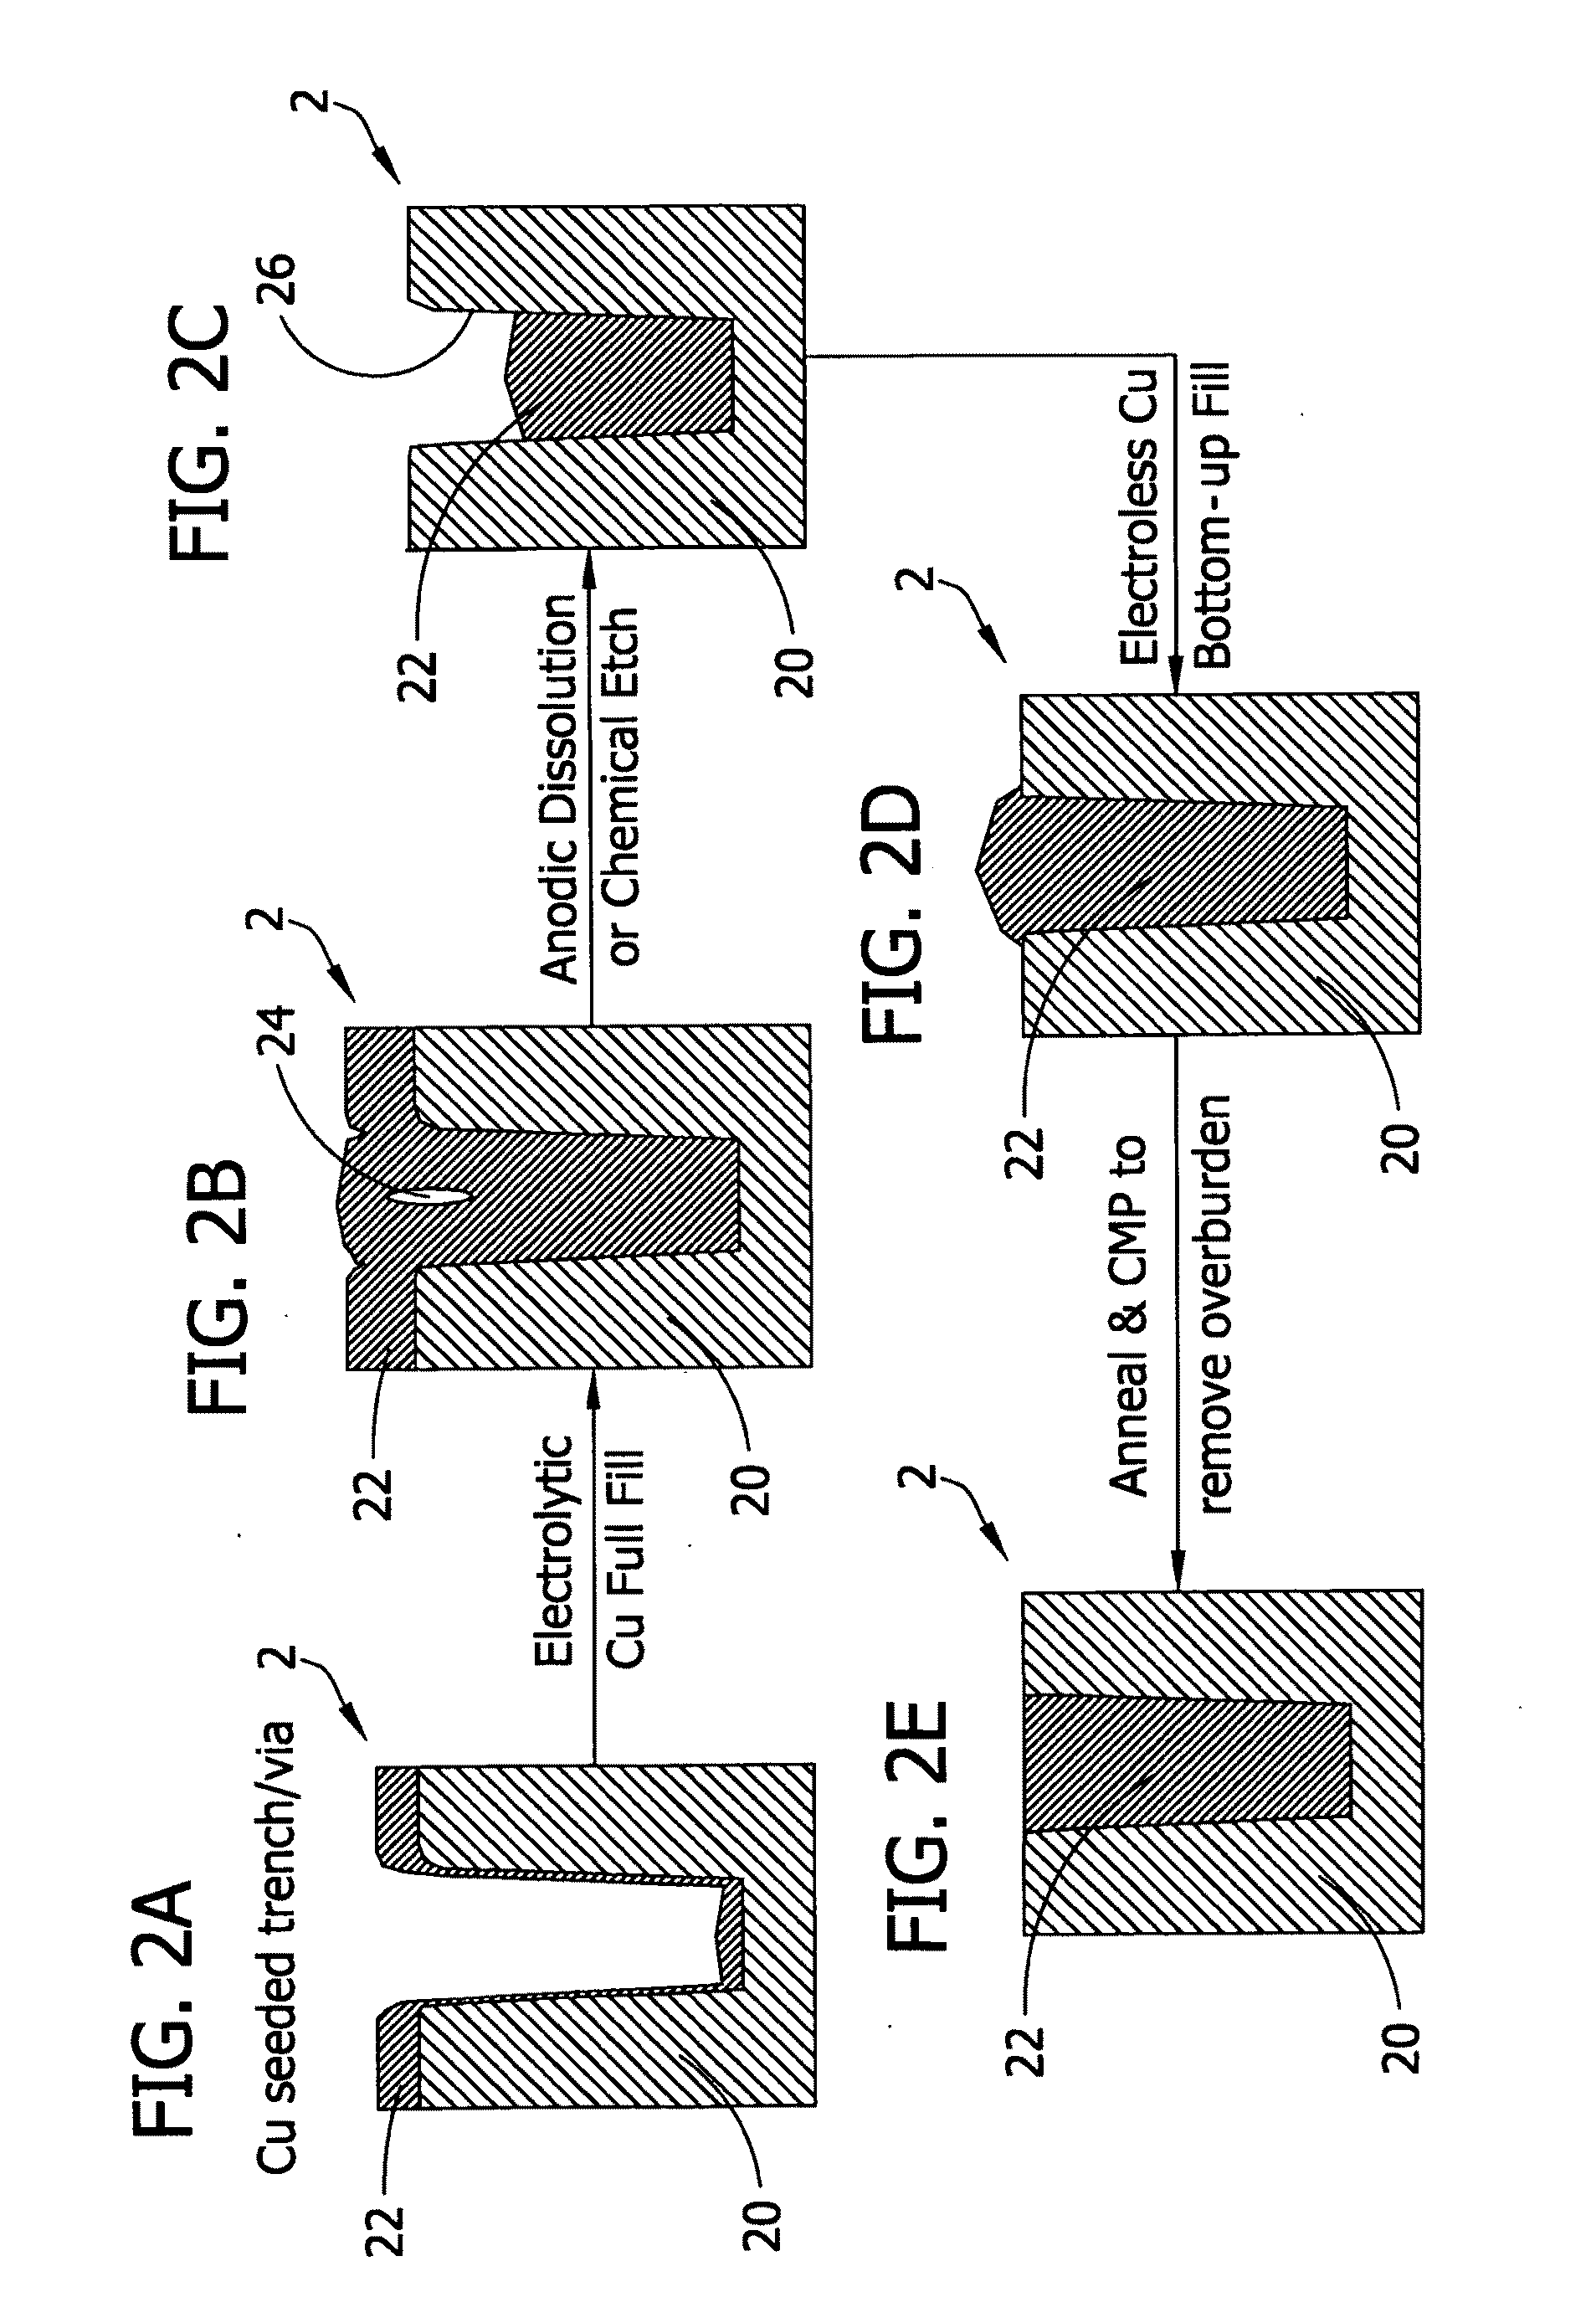 Copper deposition for filling features in manufacture of microelectronic devices